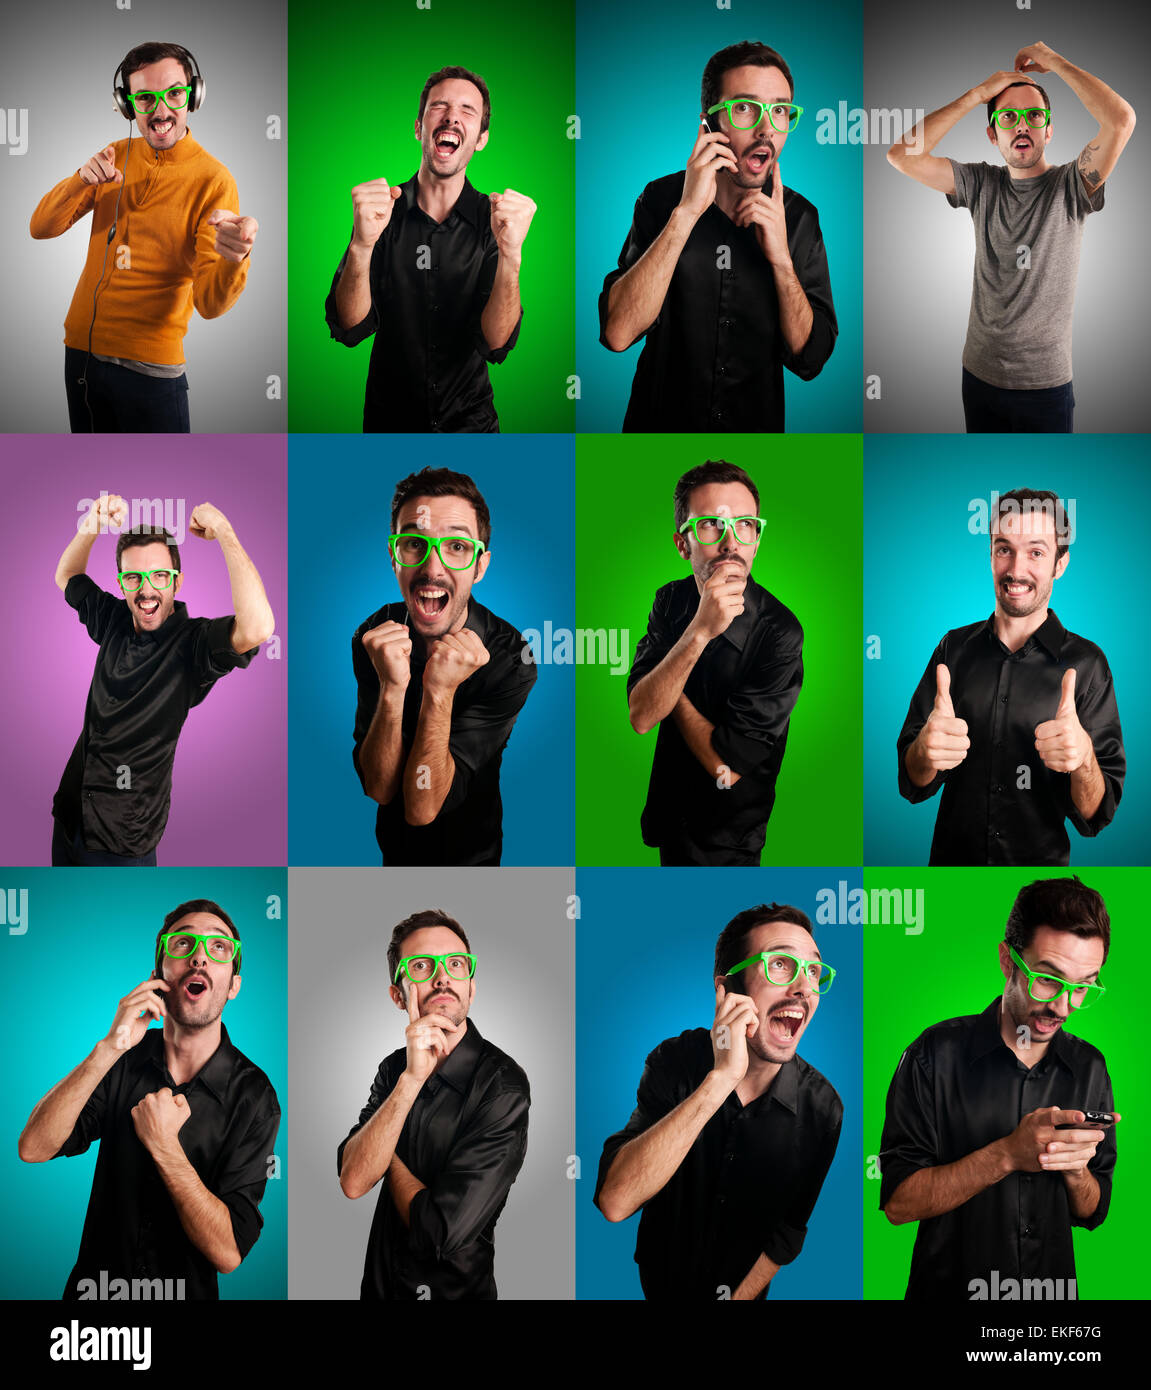 set of men with different expressions Stock Photo